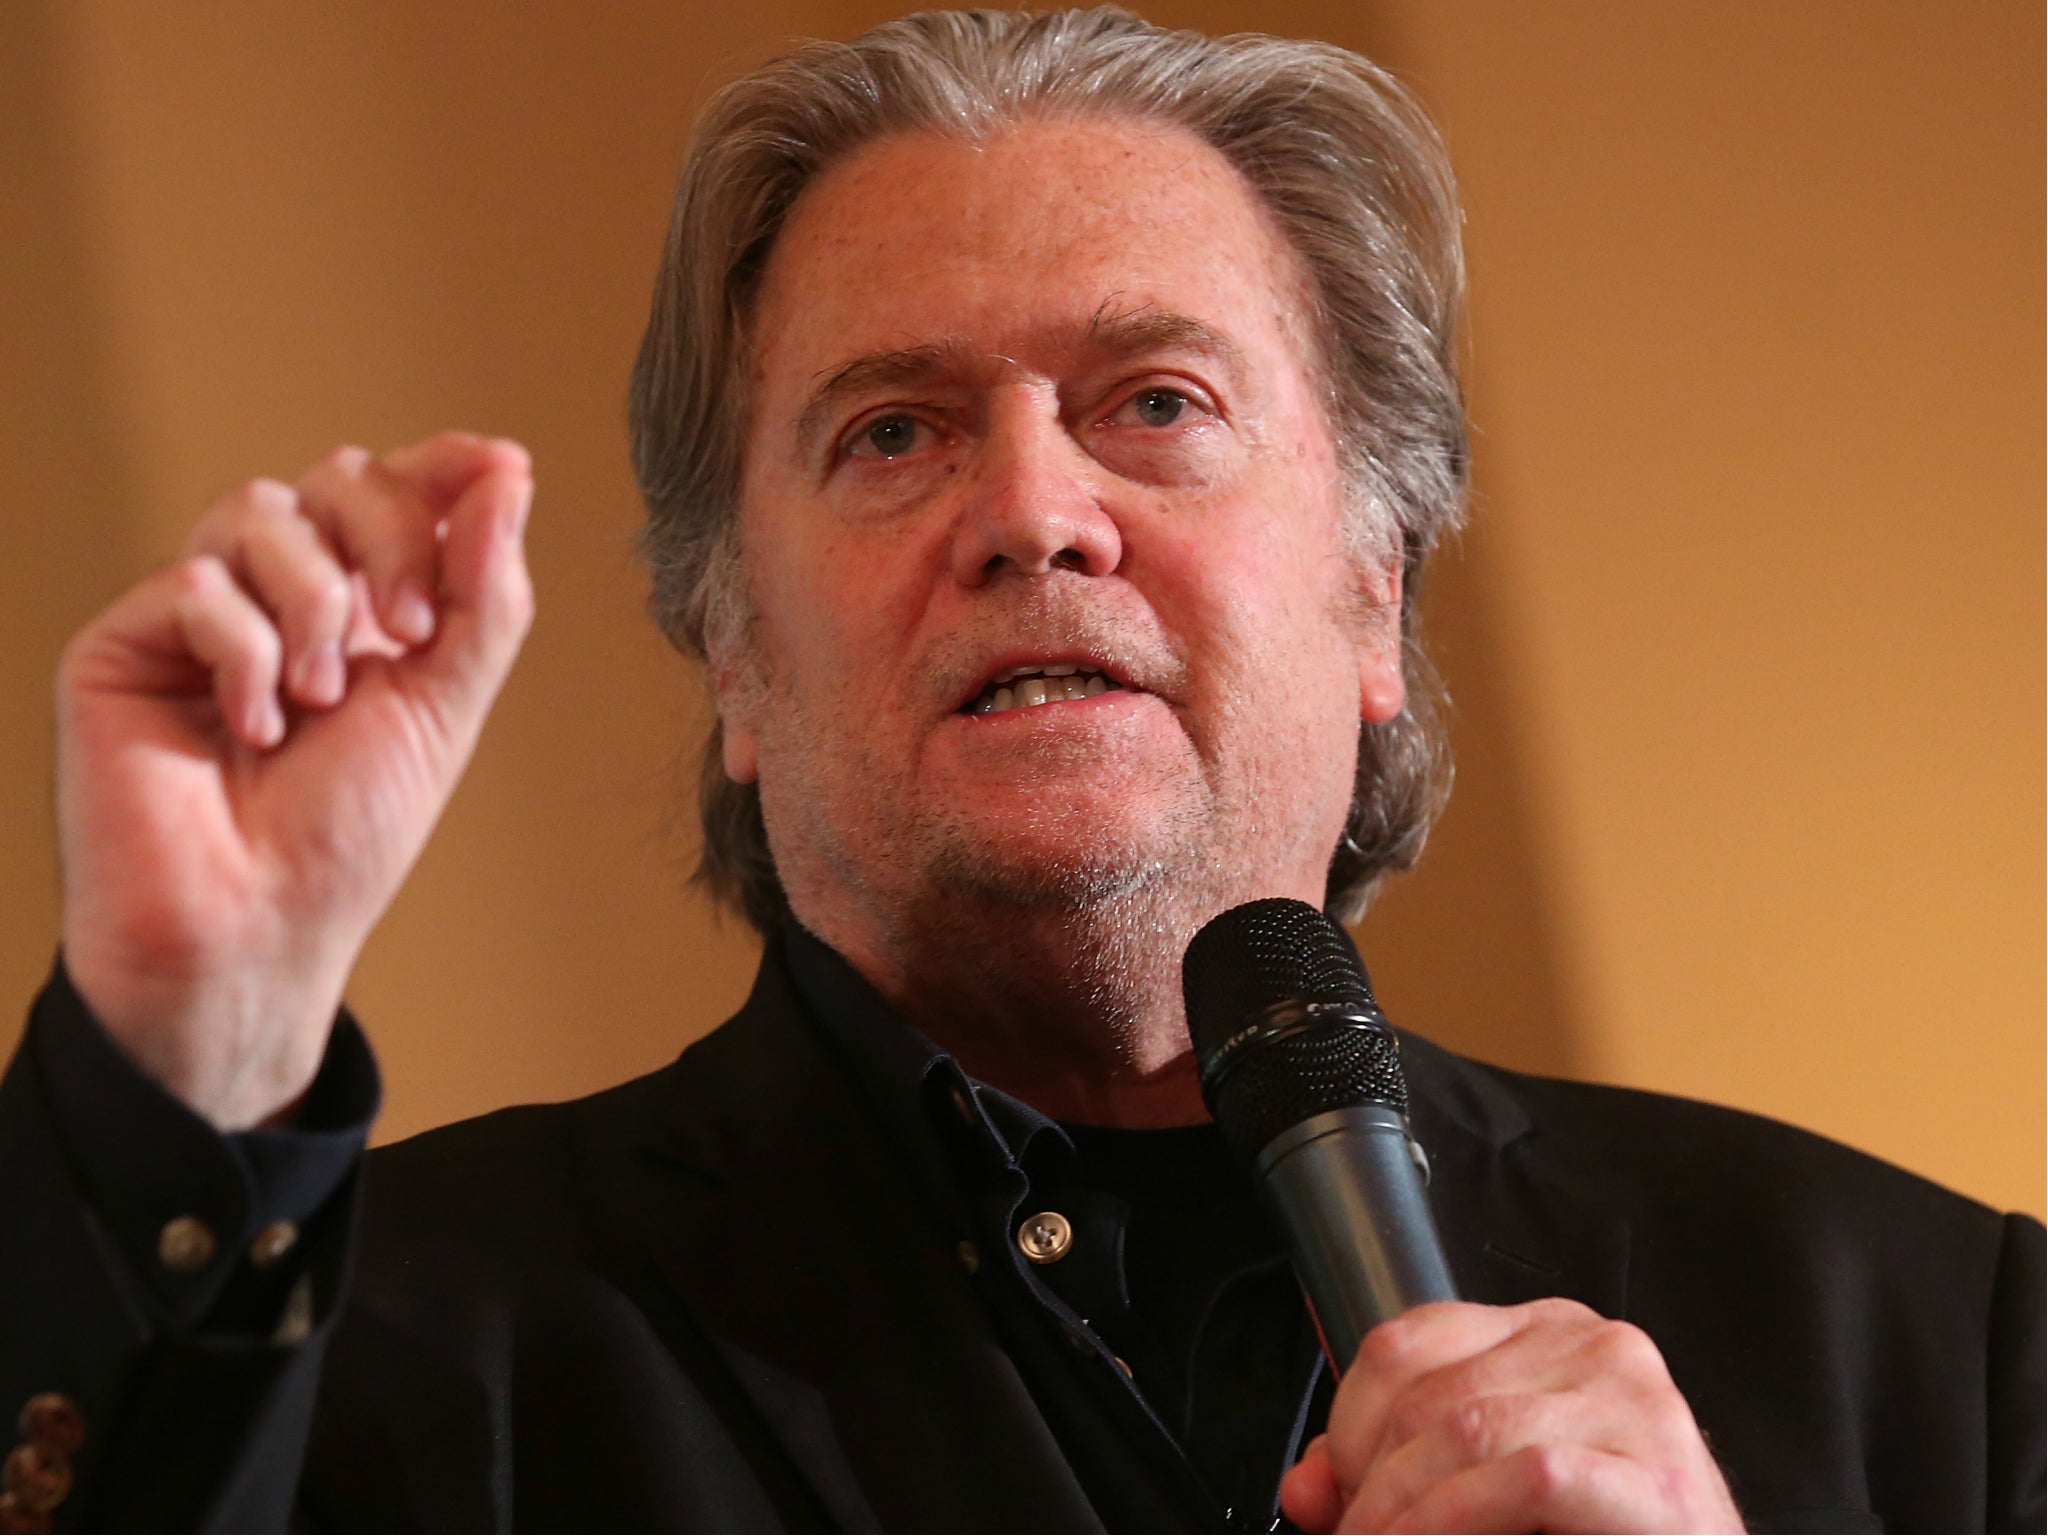 Steve Bannon, former White House Chief Strategist to US President Donald Trump, says he thinks Deputy Attorney General Rod Rosenstein will be fired soon